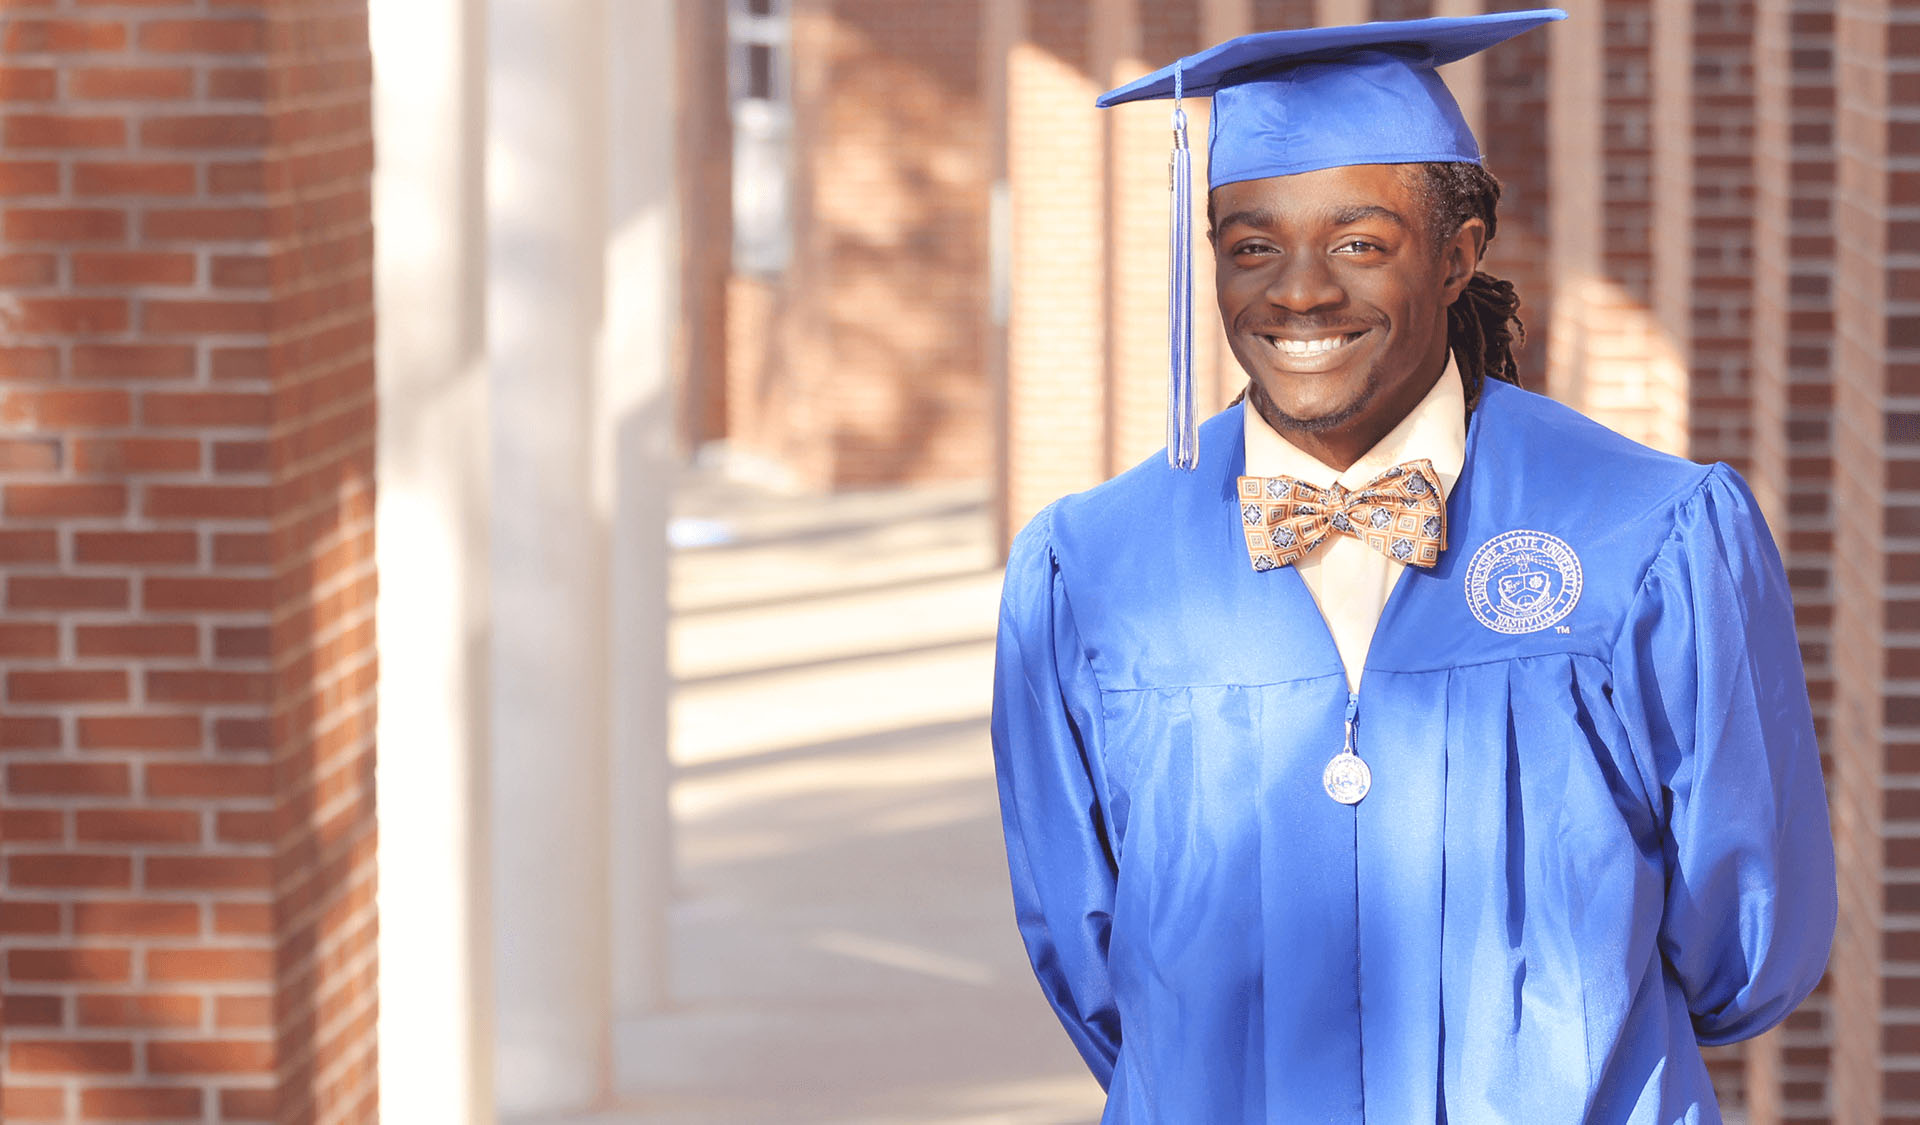 Troy graduated with a Bachelor of Science in Computer Science from Tennessee State University and a Master of Science in Systems Engineering from George Washington University. [Graduation photo]